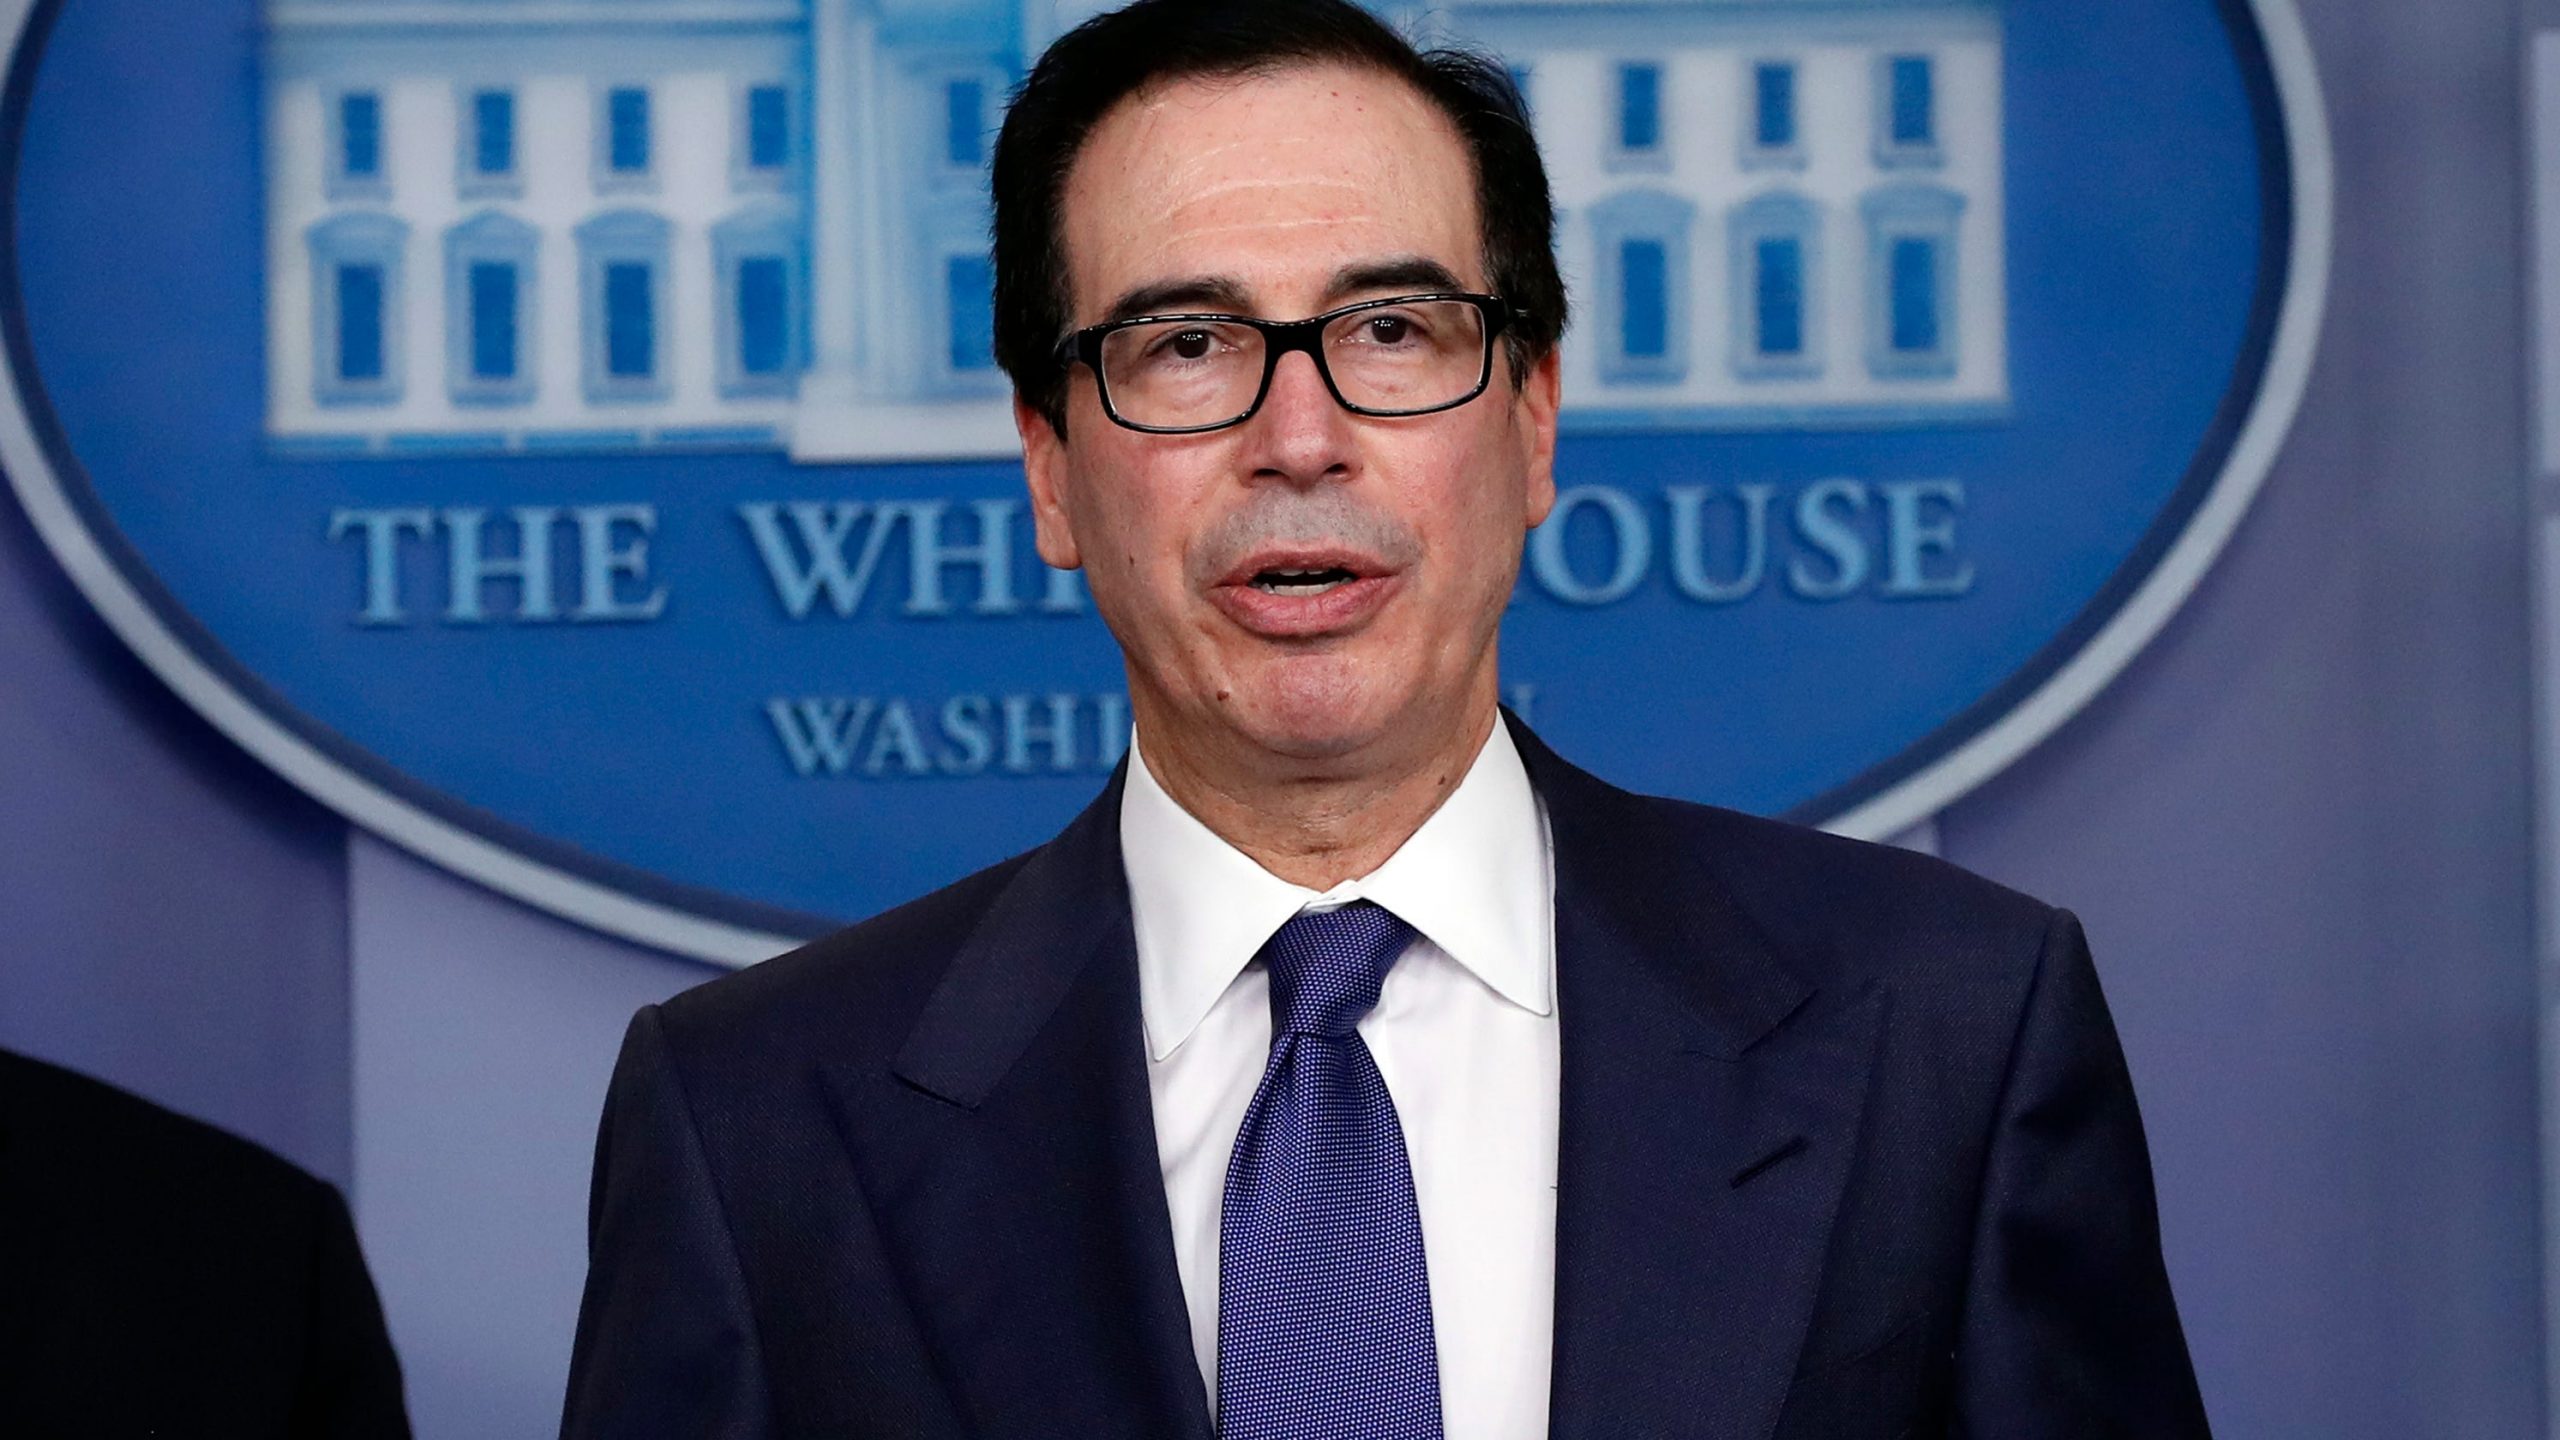 Mnuchin says deal ‘very close’ on billions more for small-business loans